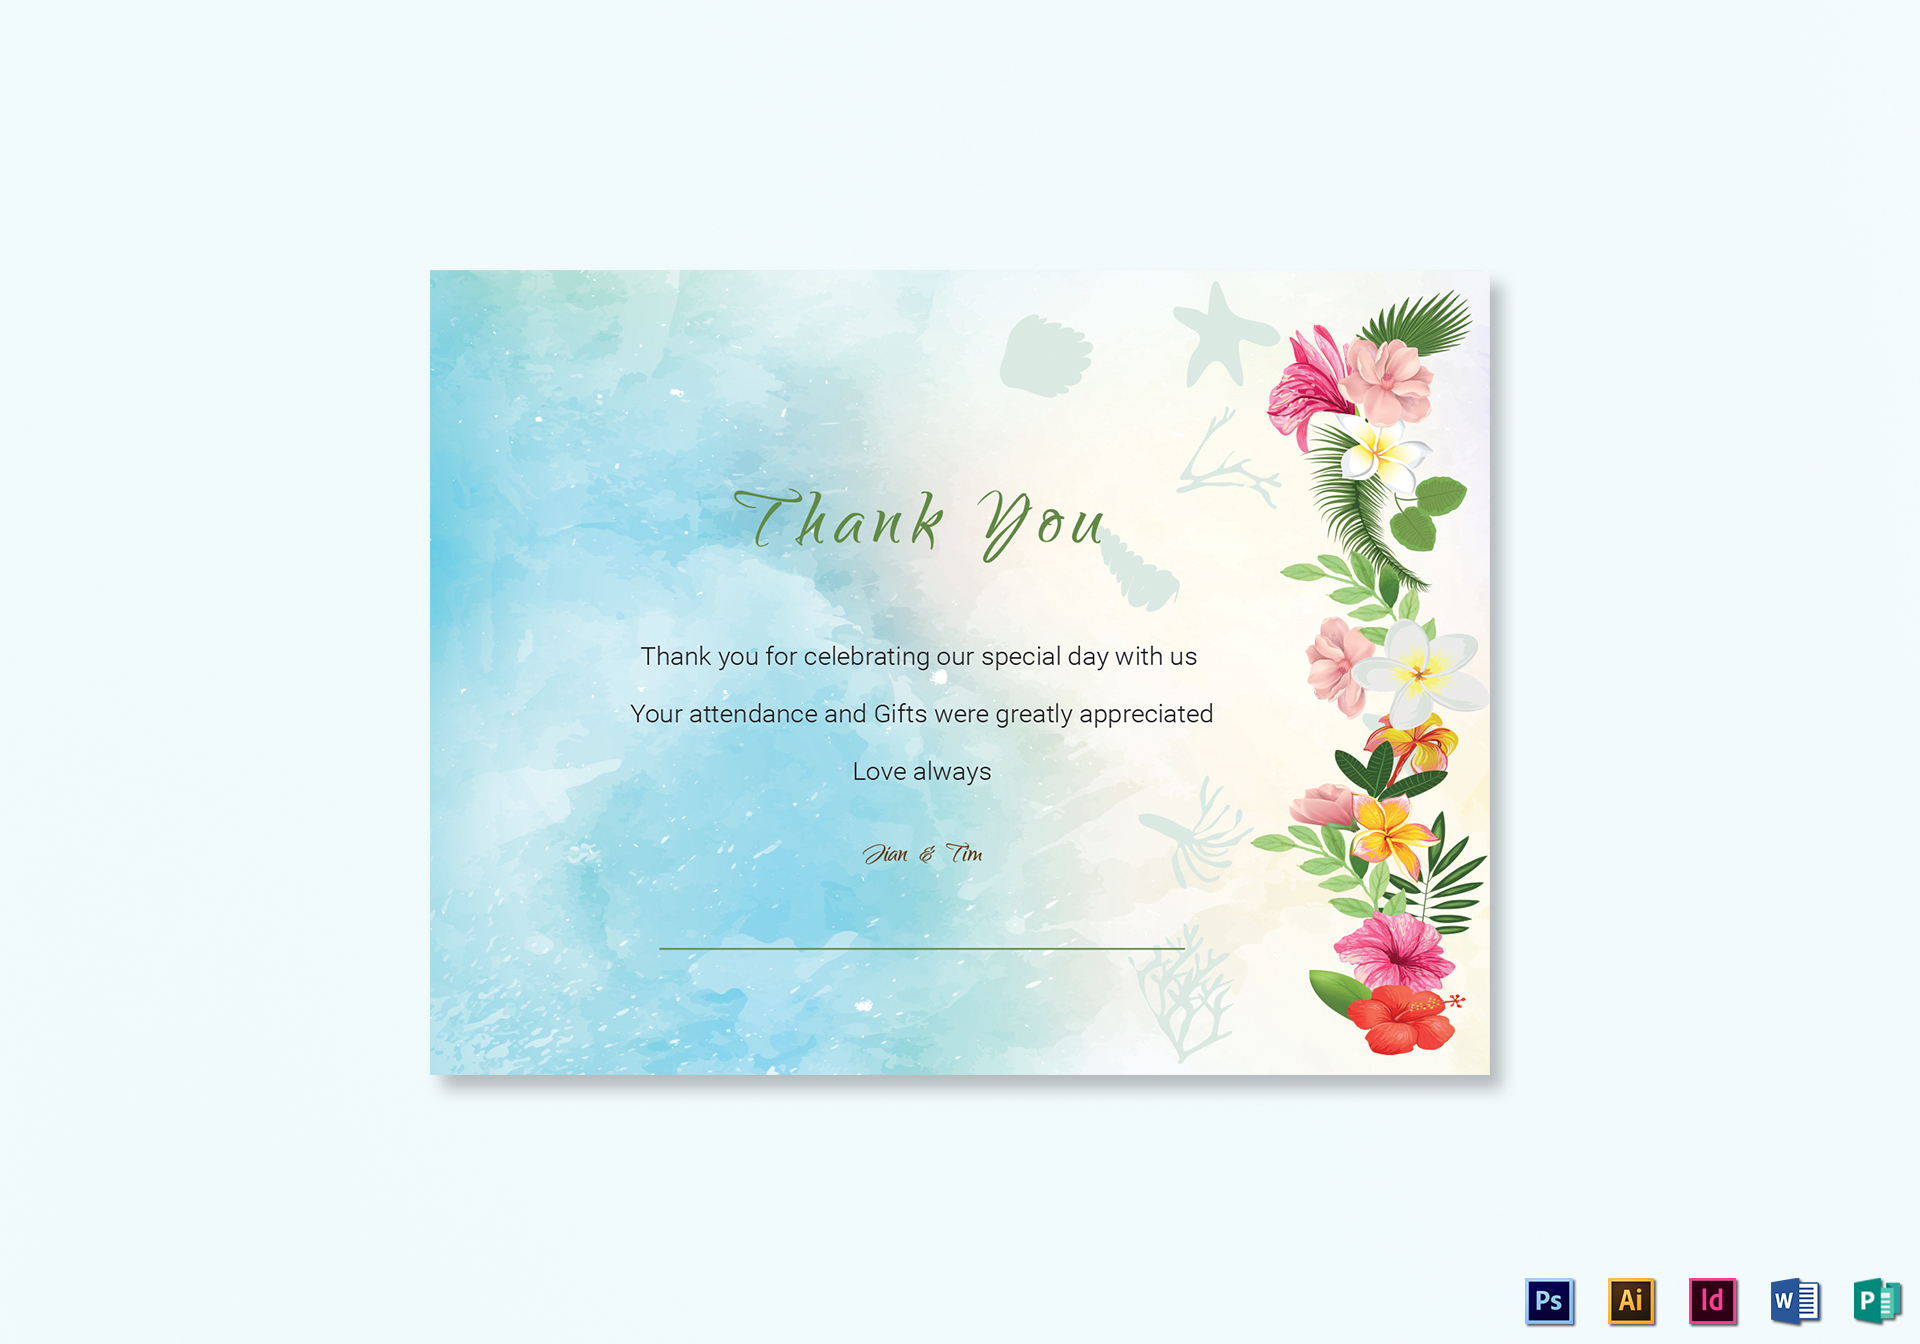 010 Thank You Card Template Word Top Ideas Half Fold 2007 Pertaining To Half Fold Greeting Card Template Word